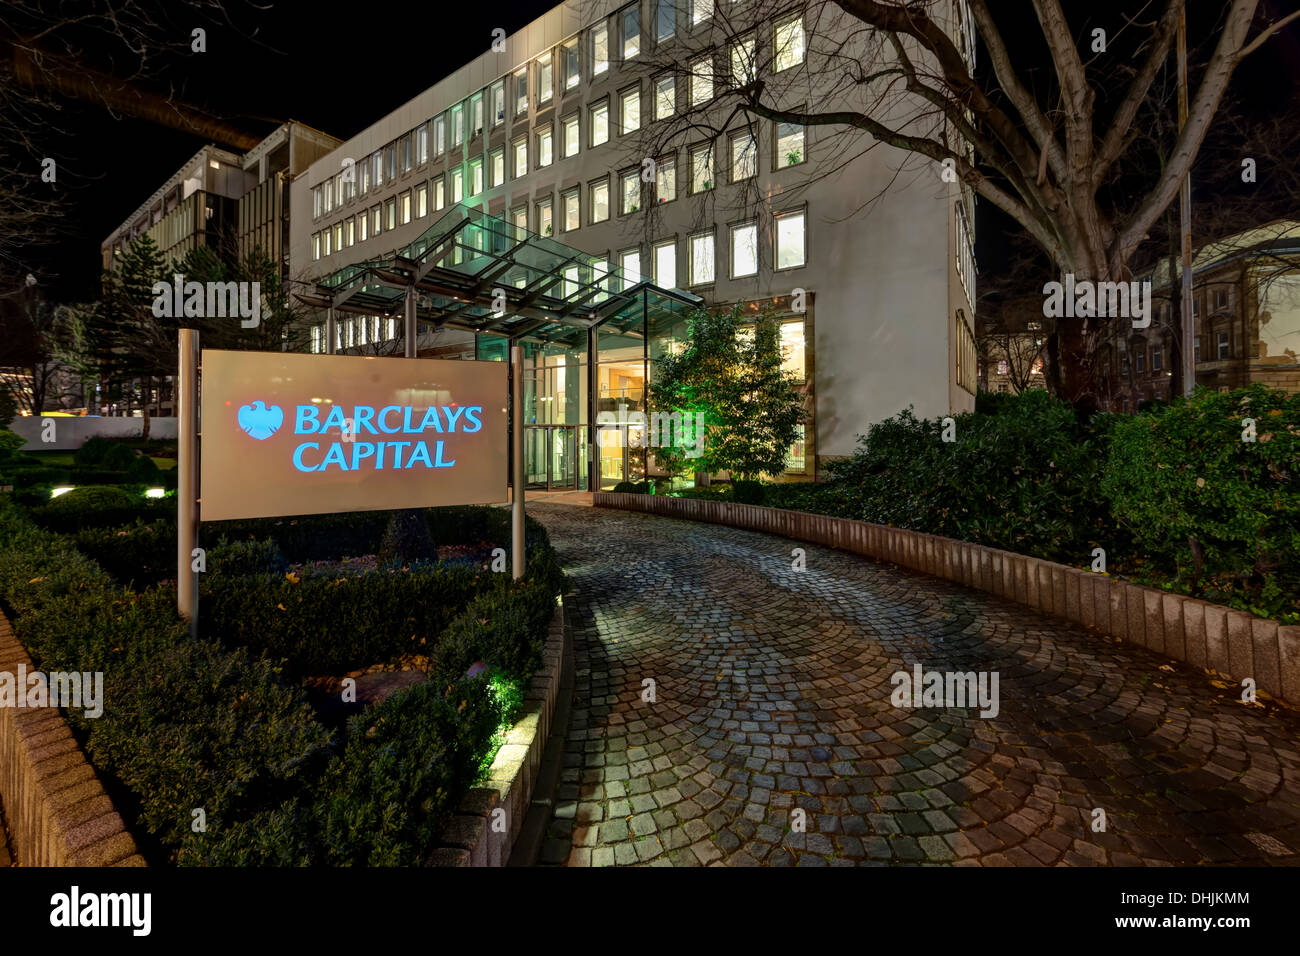 Germany, Hesse, Frankfurt, Westend, view to entrance of Barclays Capital Bank Stock Photo